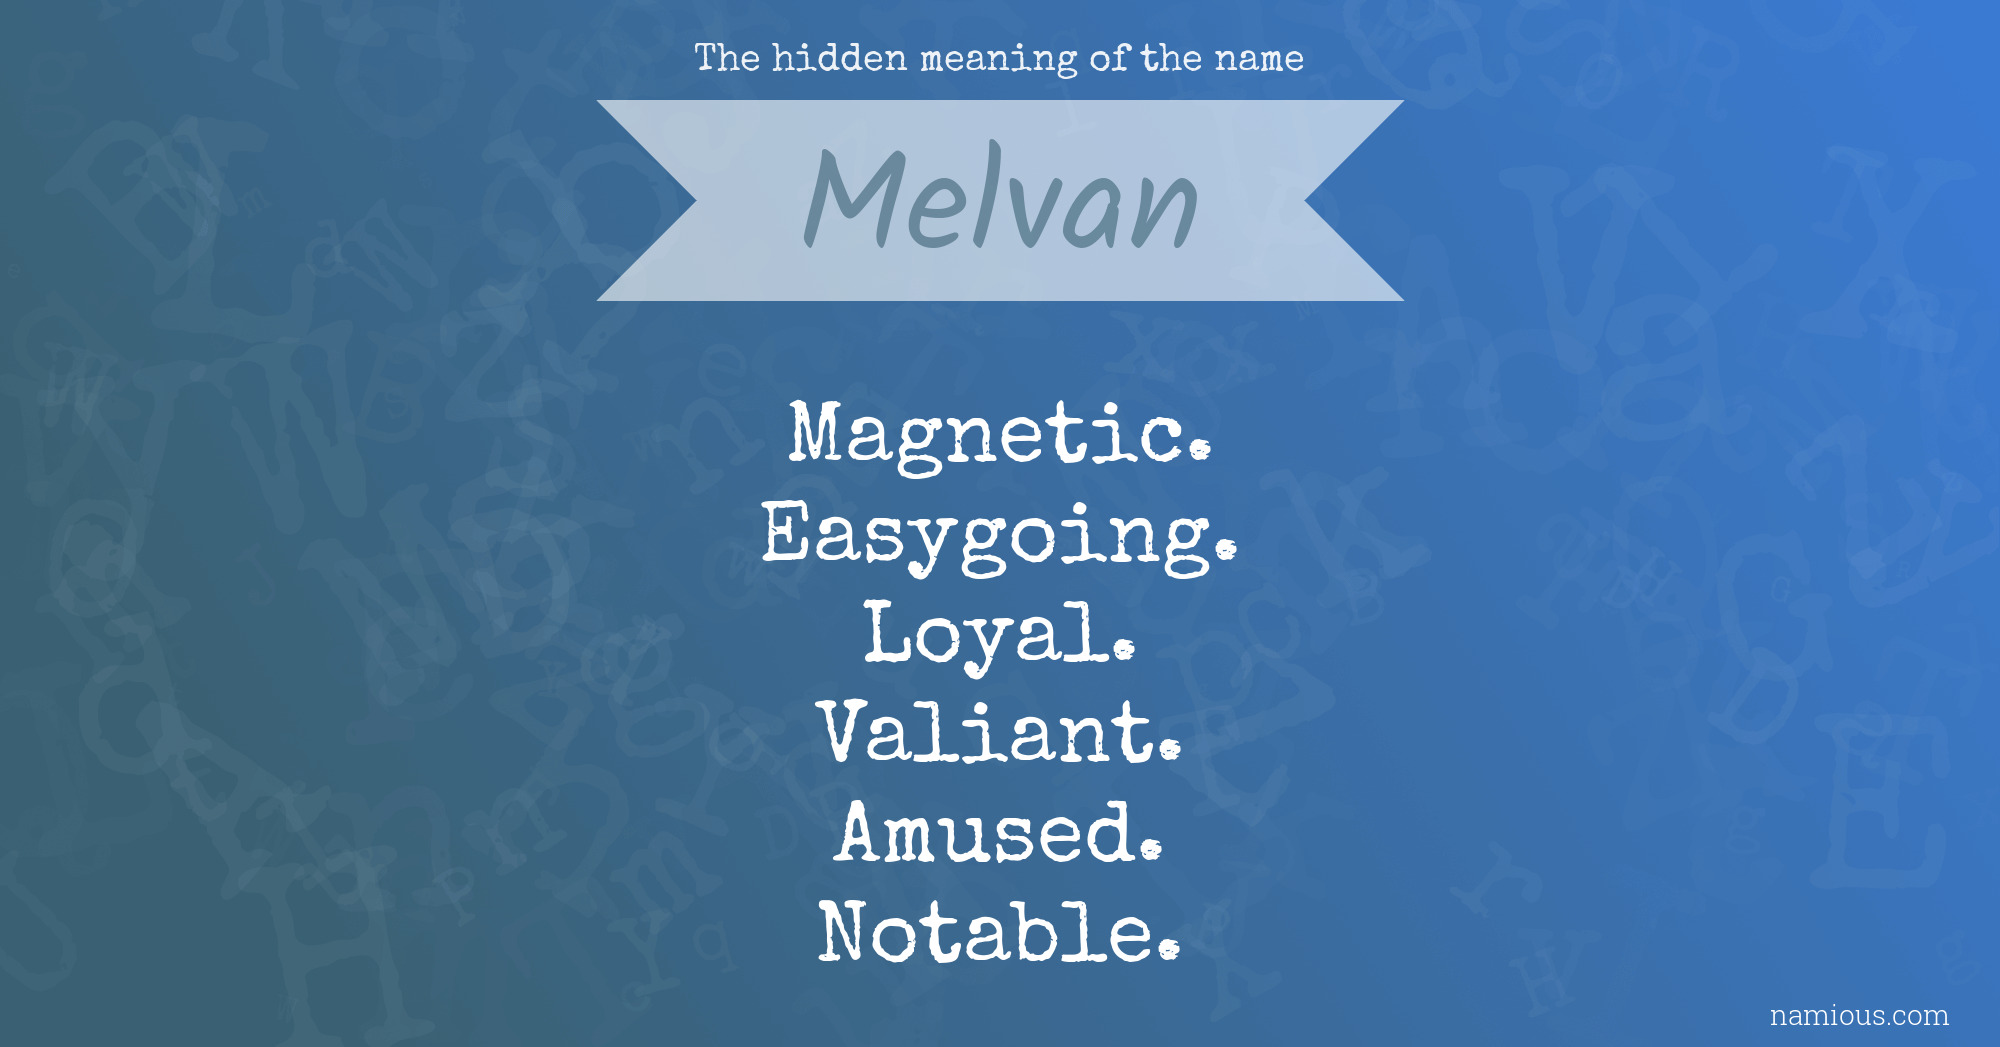 The hidden meaning of the name Melvan